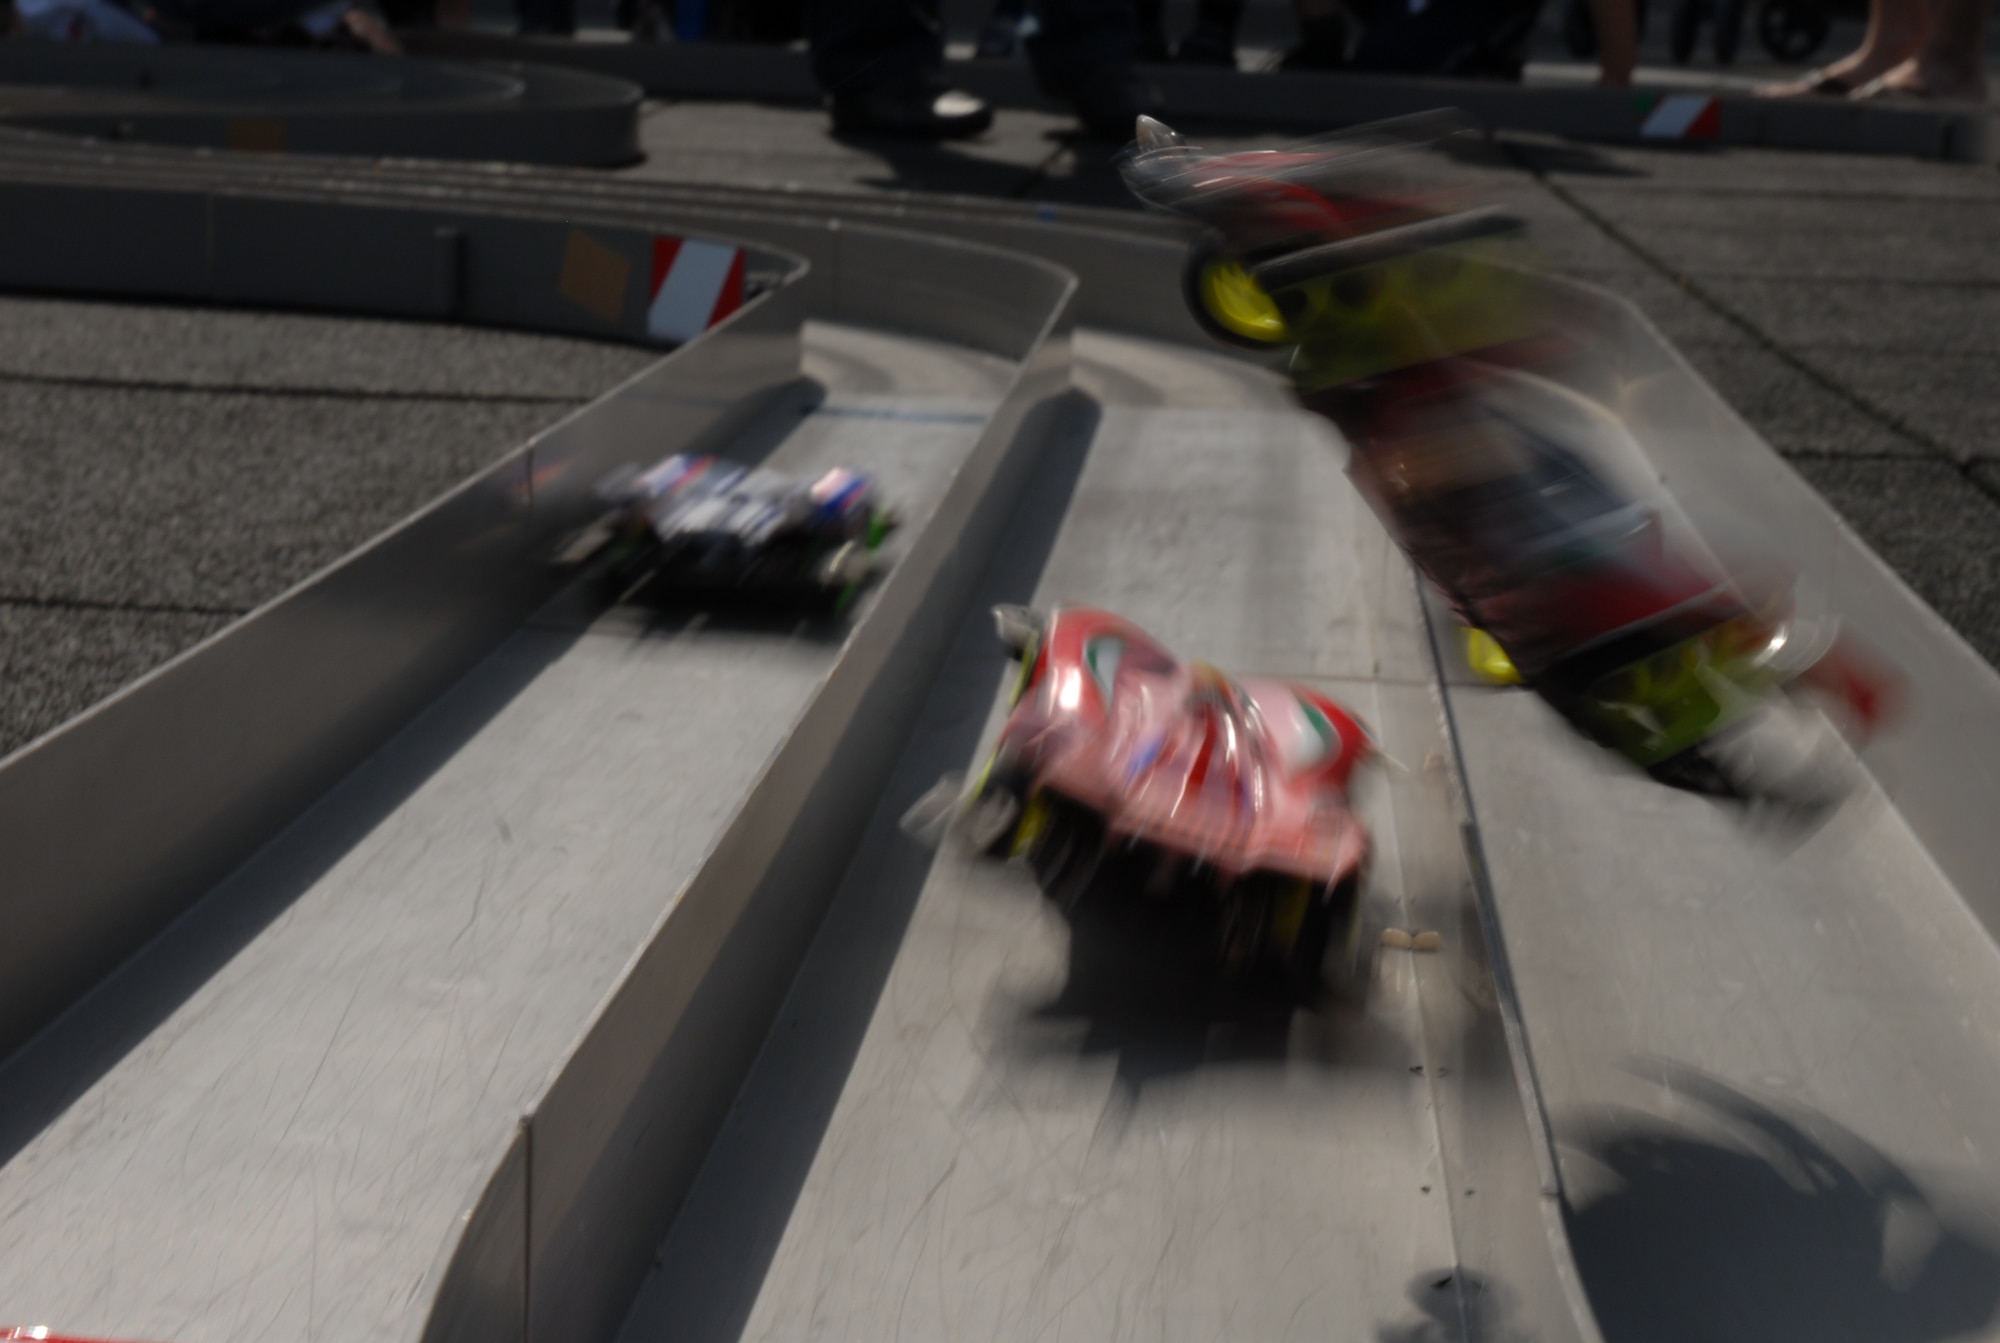 Battery-operated mini race cars zip through a race track at the Okinawa City Children’s Zoo April 27. More than 50 American and Okinawan children took part in the building and racing of the cars. (U.S. Air Force photo/Airman Chad Warren)